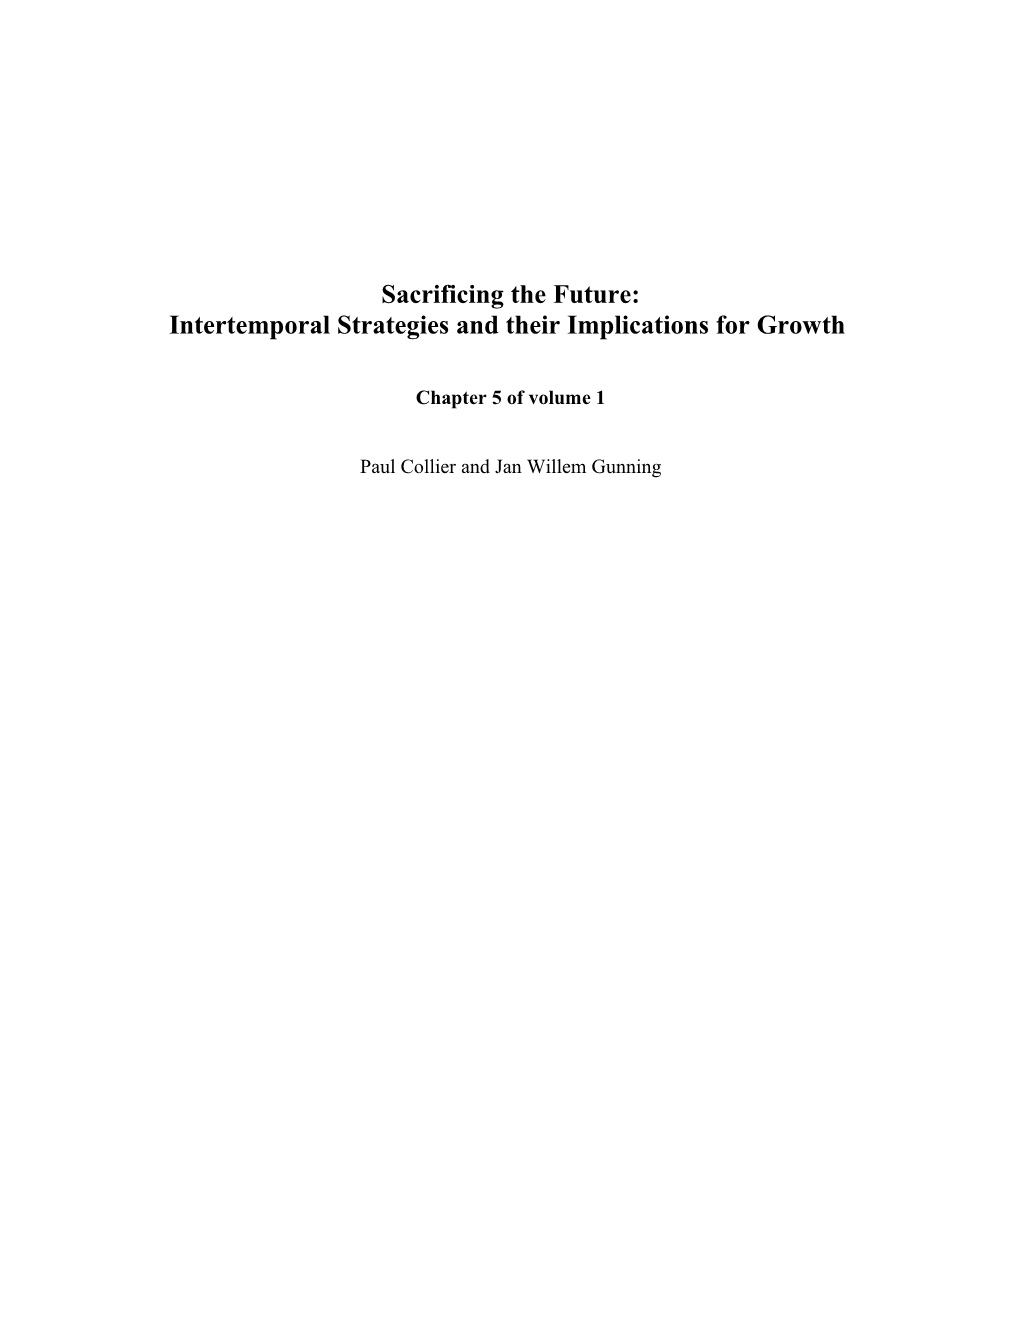 Intertemporal Strategies and Their Implications for Growth